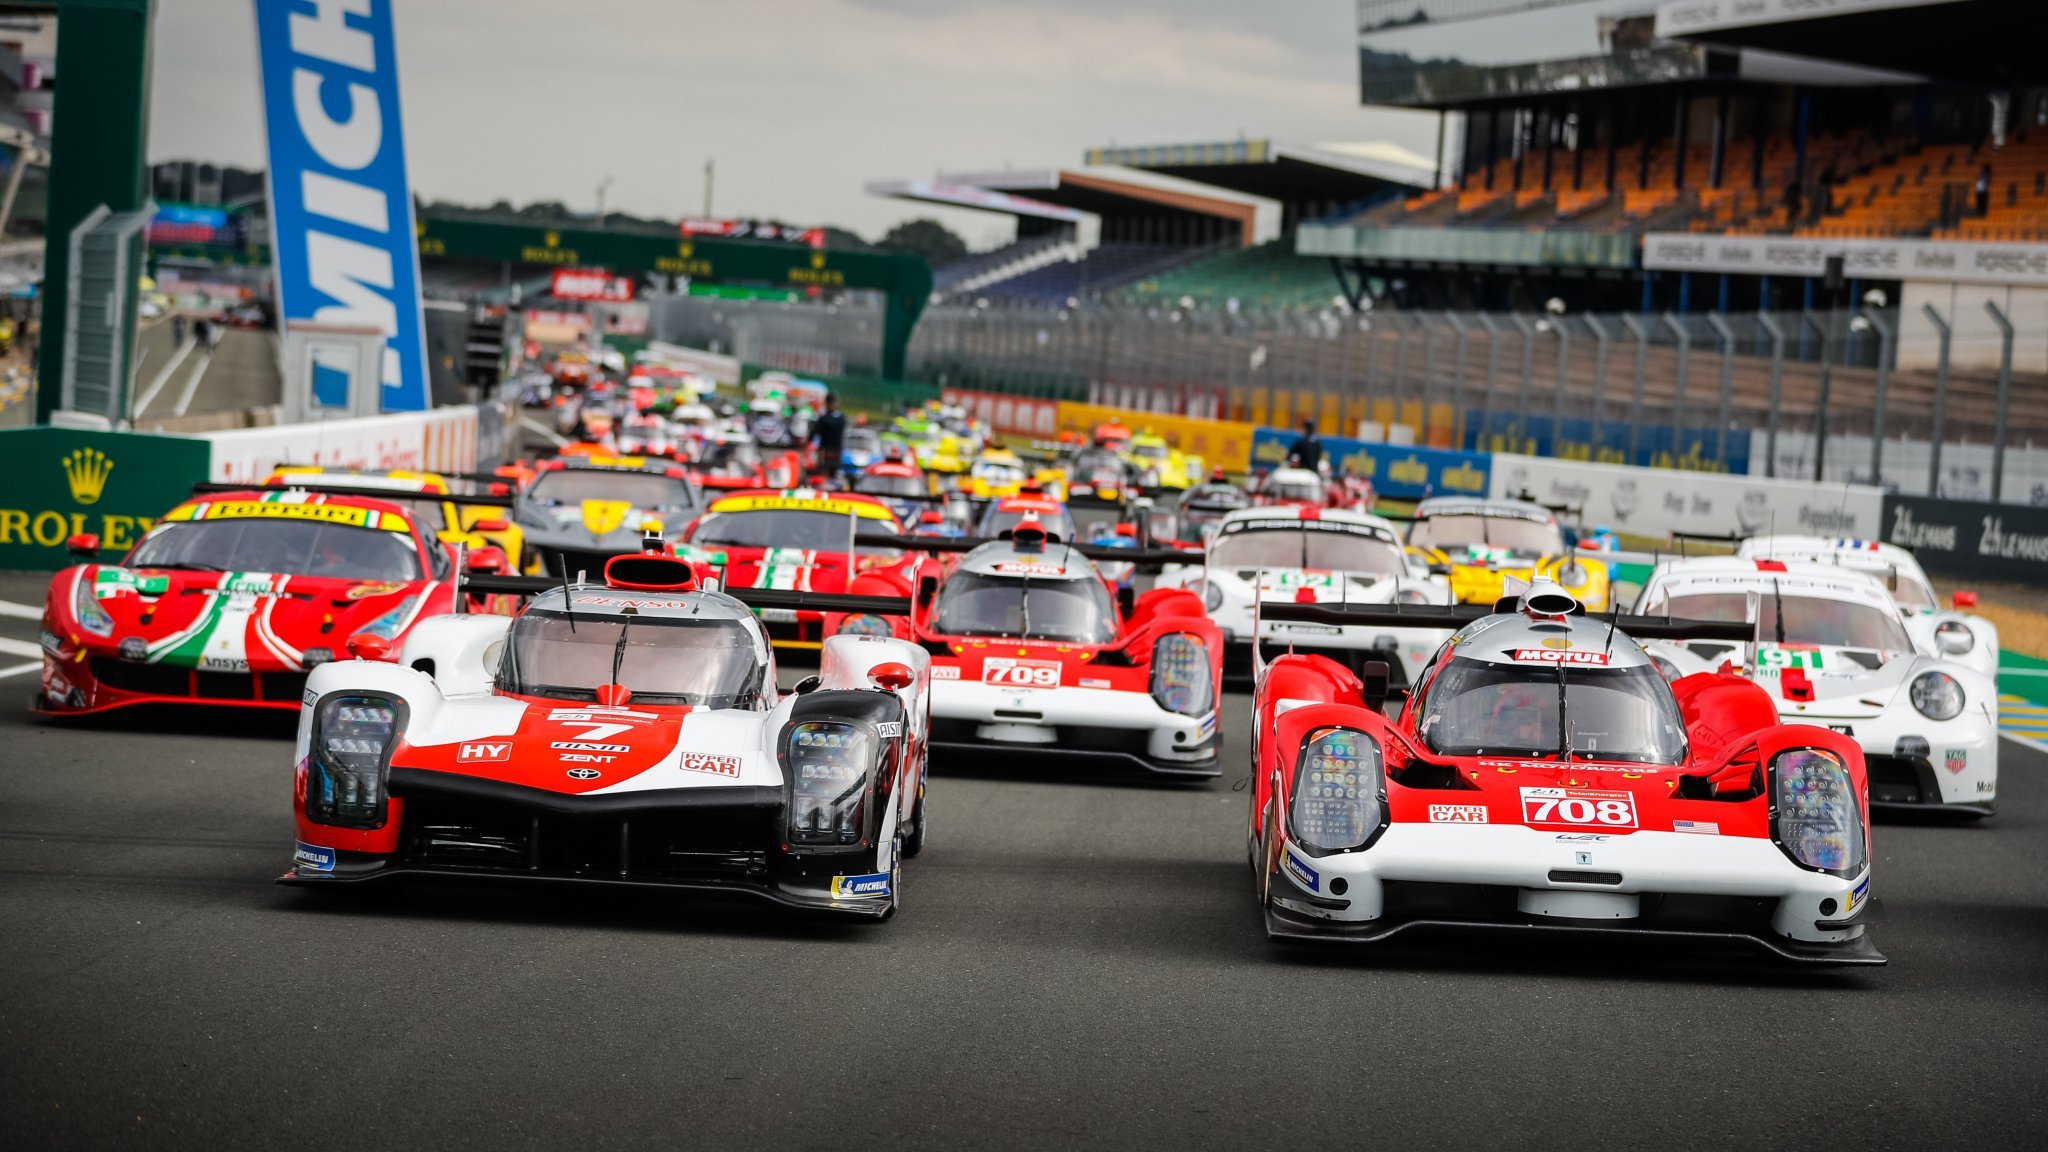 2021 Le Mans 24 Hours Preview, Live Streams, Schedules and Discussion